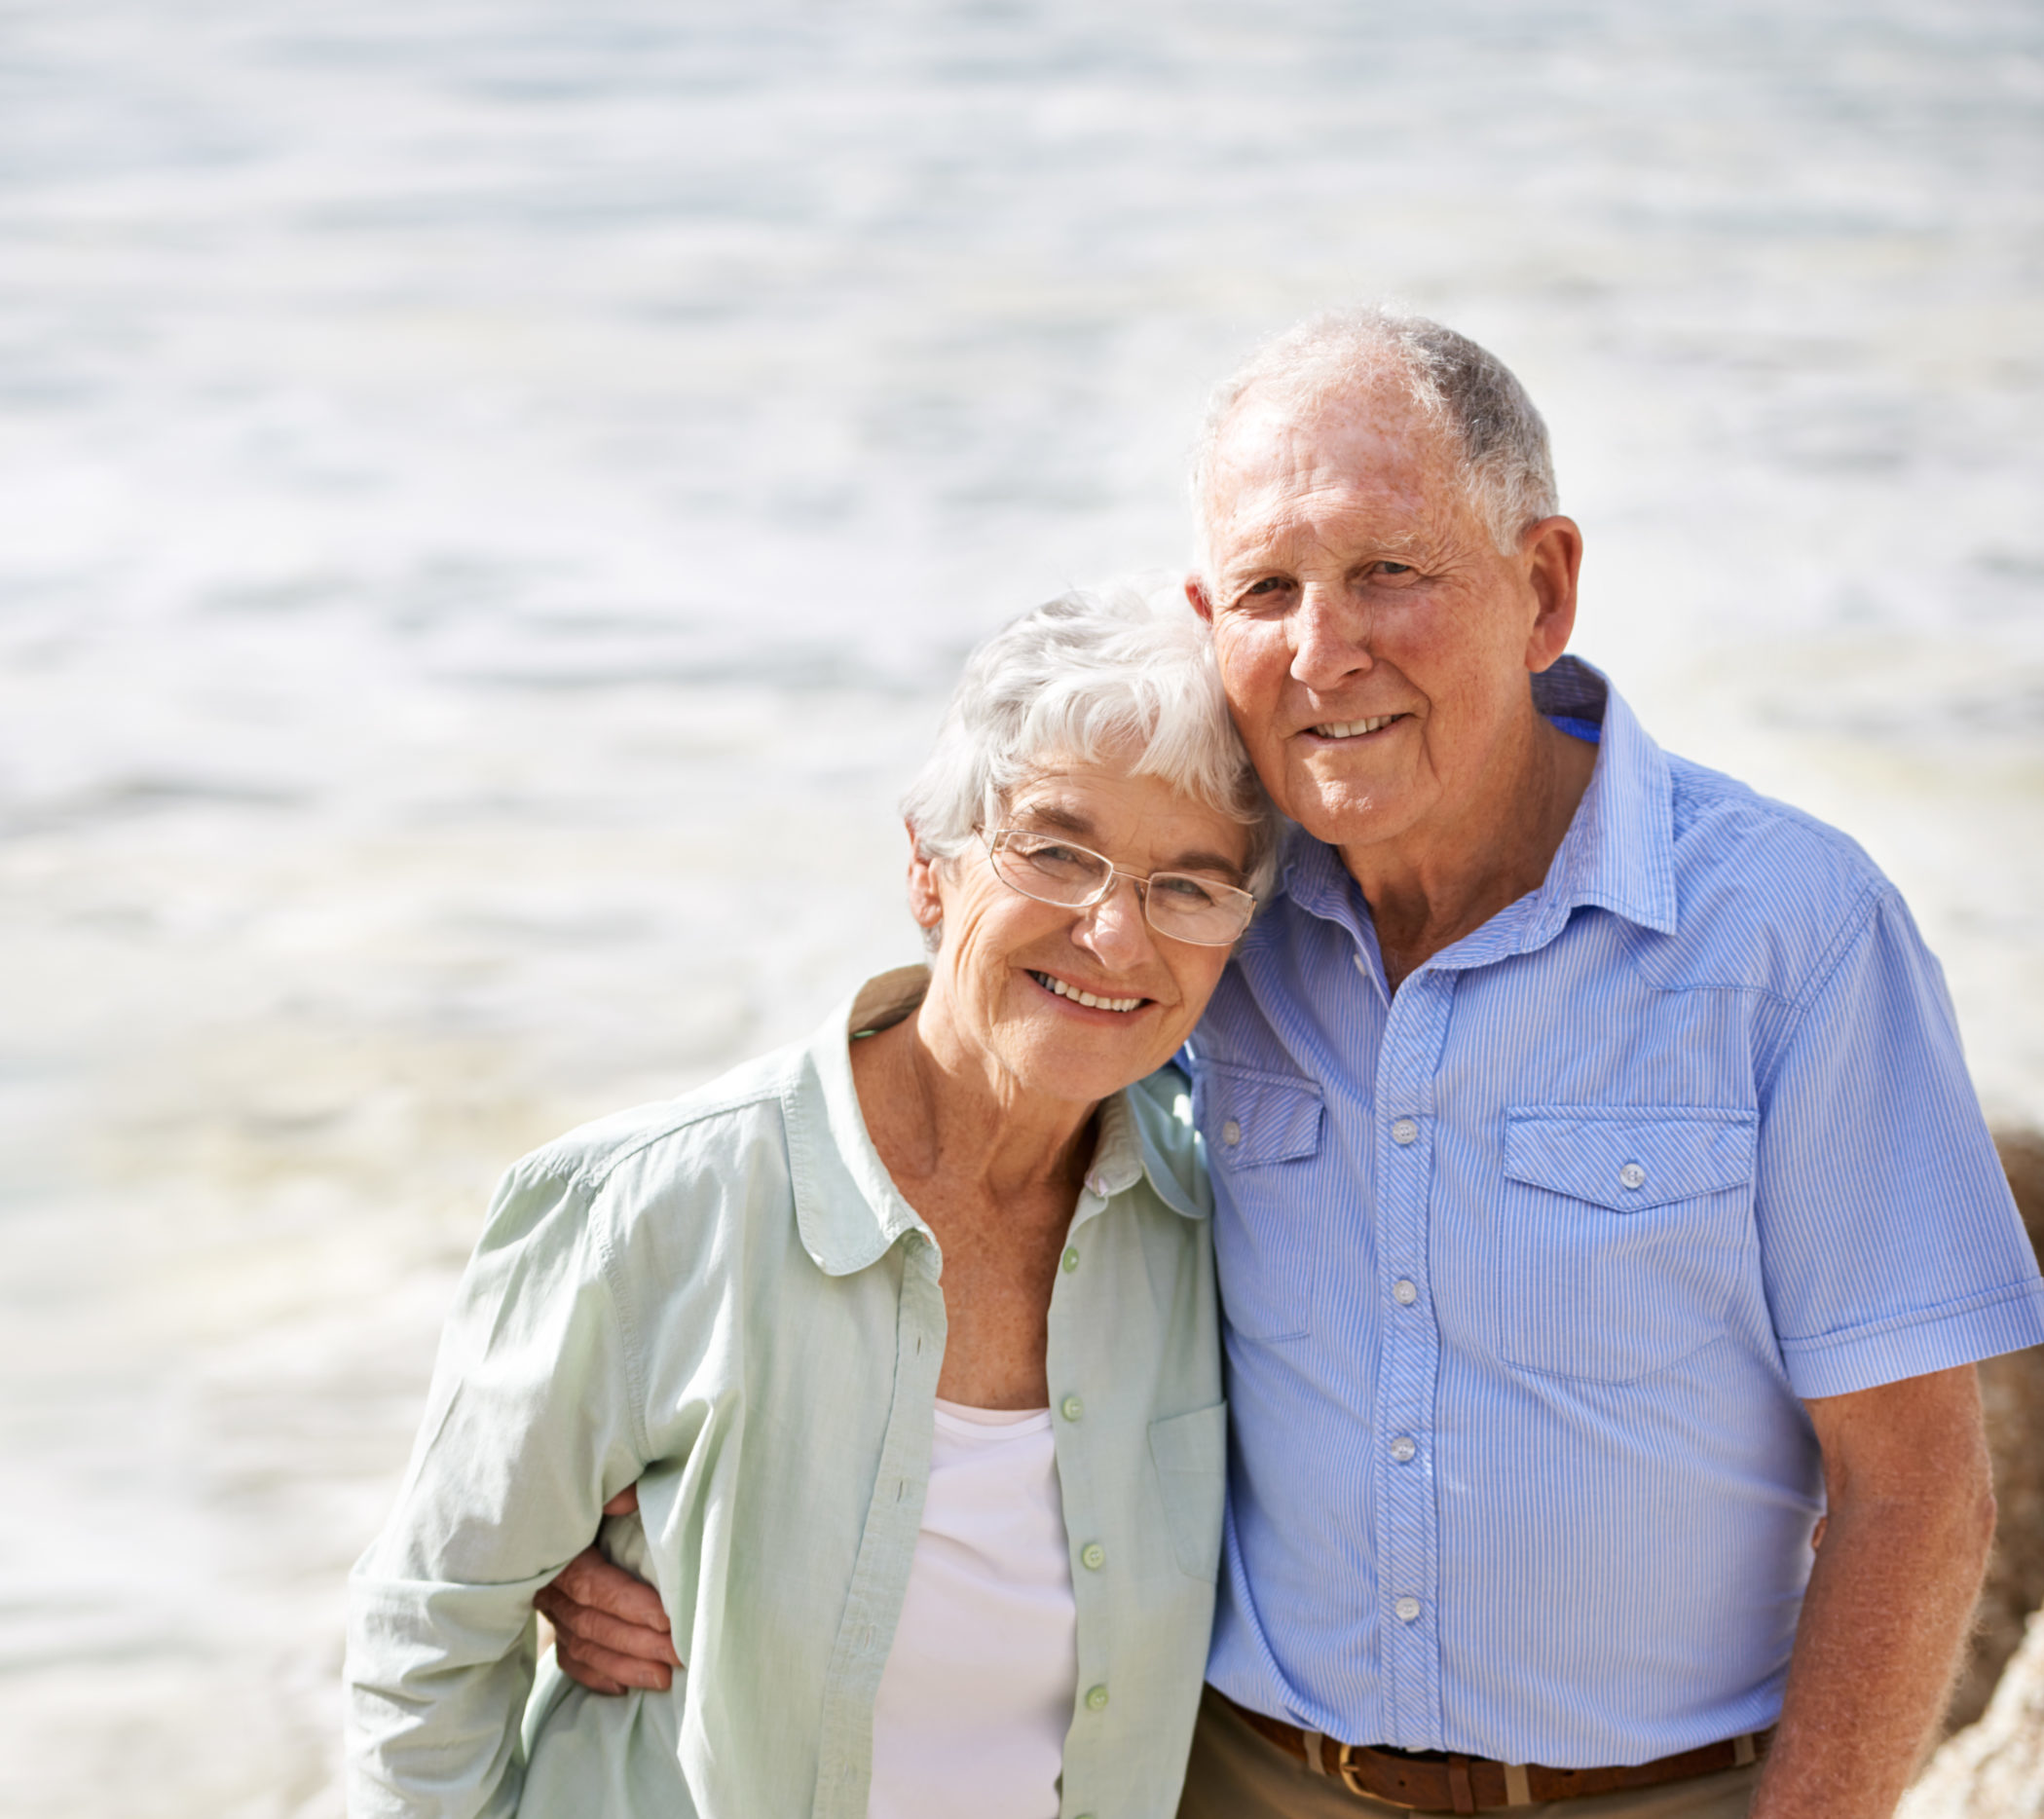 Photo of an elderly man and woman smiling.